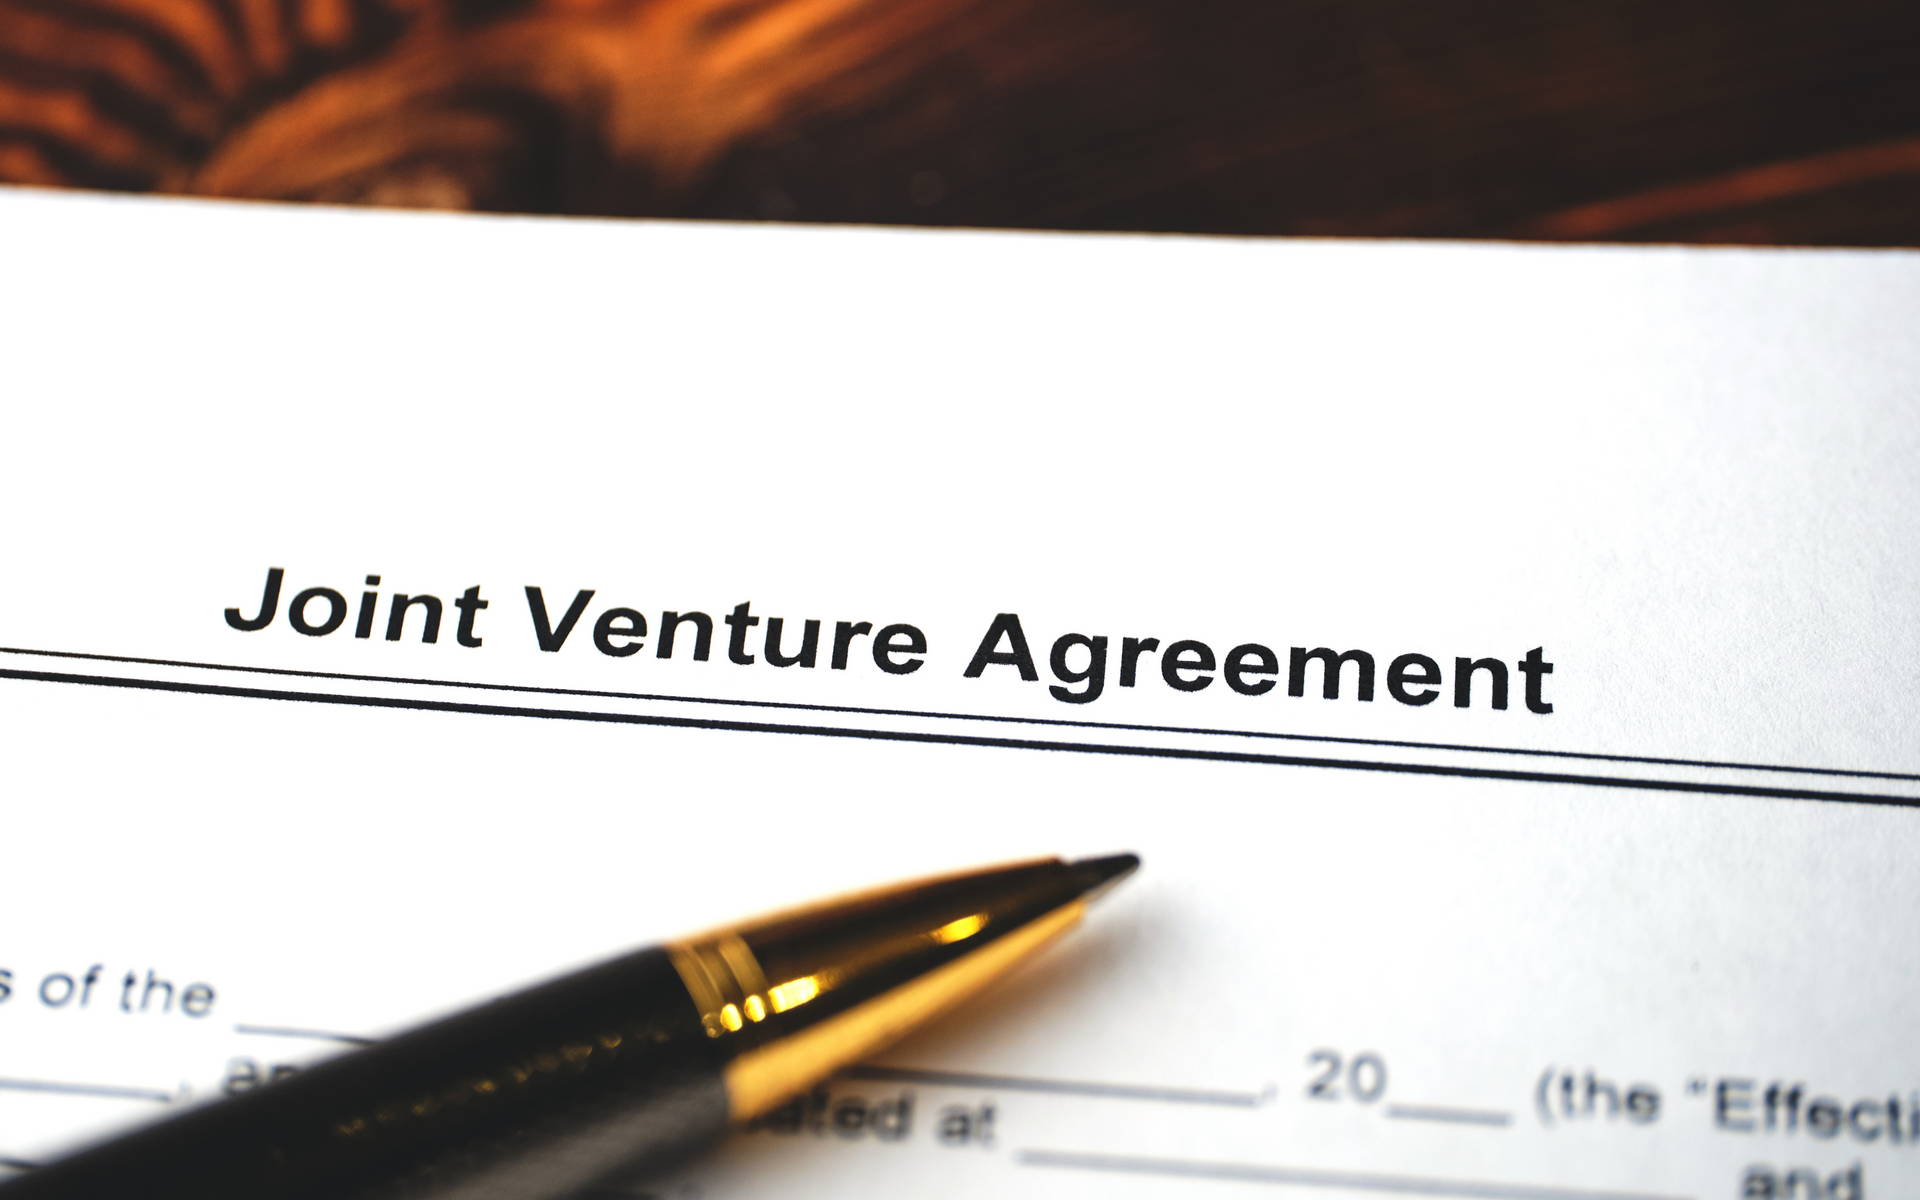 Joint Venture Agreement image